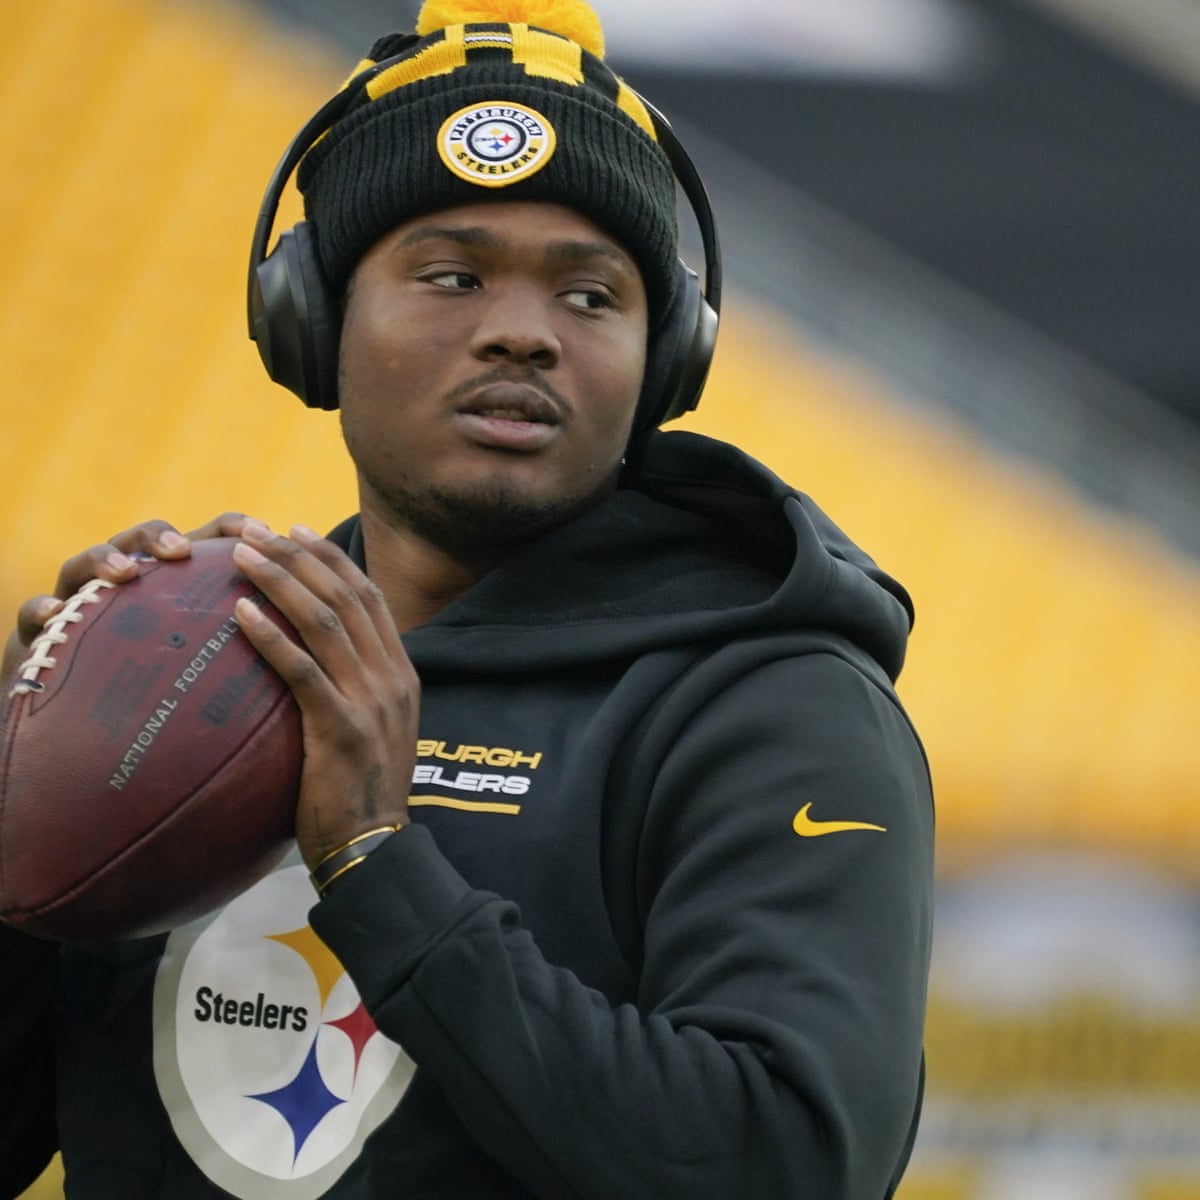 Steelers QB Dwayne Haskins was twice over alcohol limit when